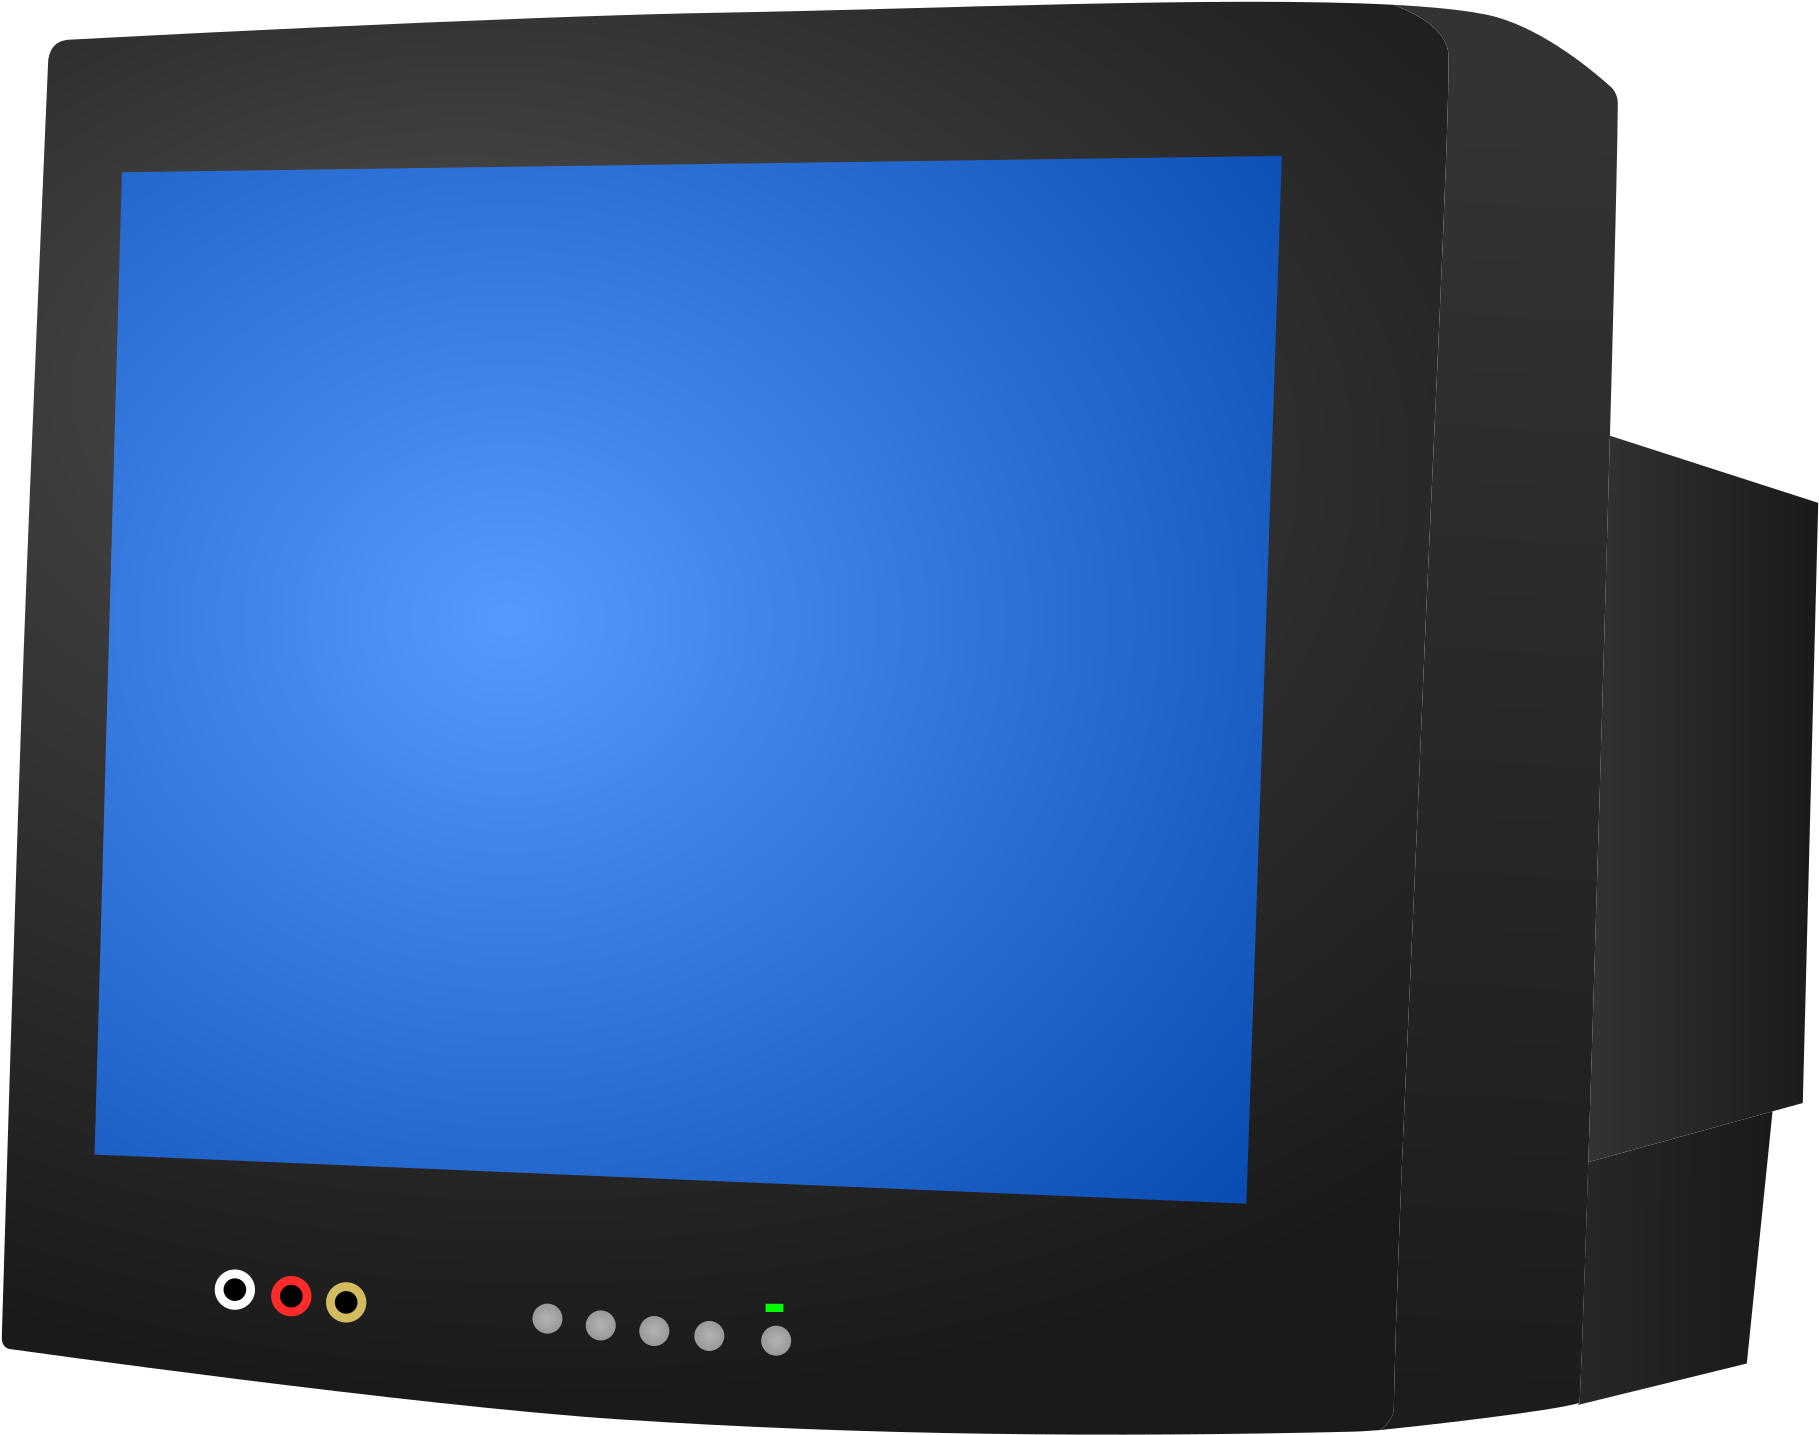 A Black Computer Monitor With A Blue Screen